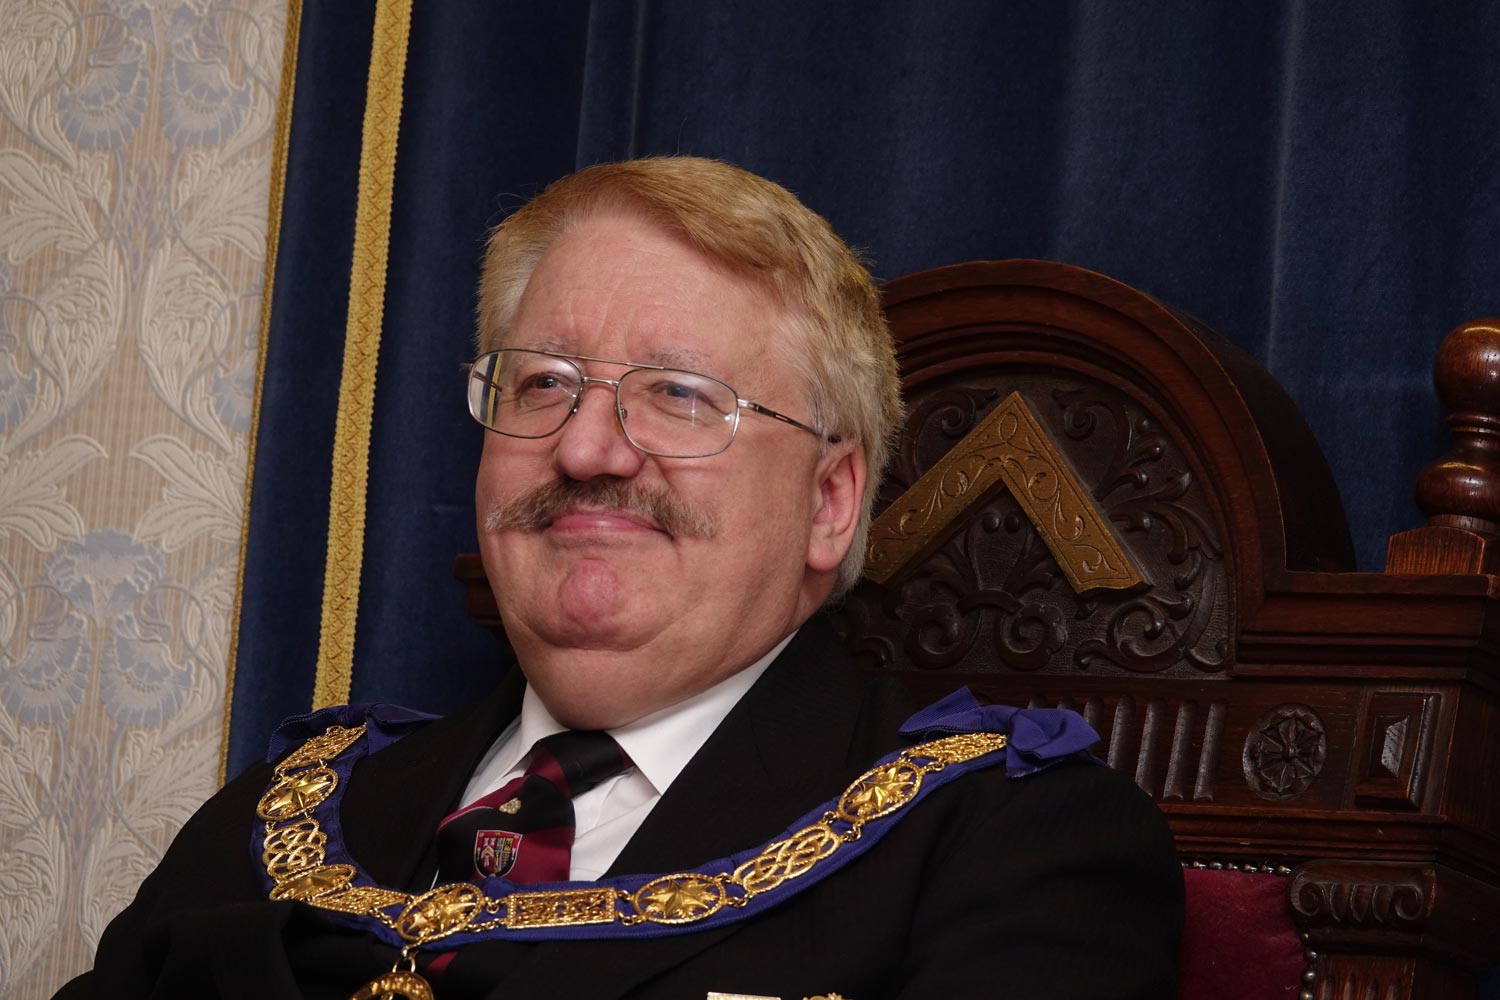 David S Pratt, The Provincial Grand Master of the Province of Yorkshire West Riding